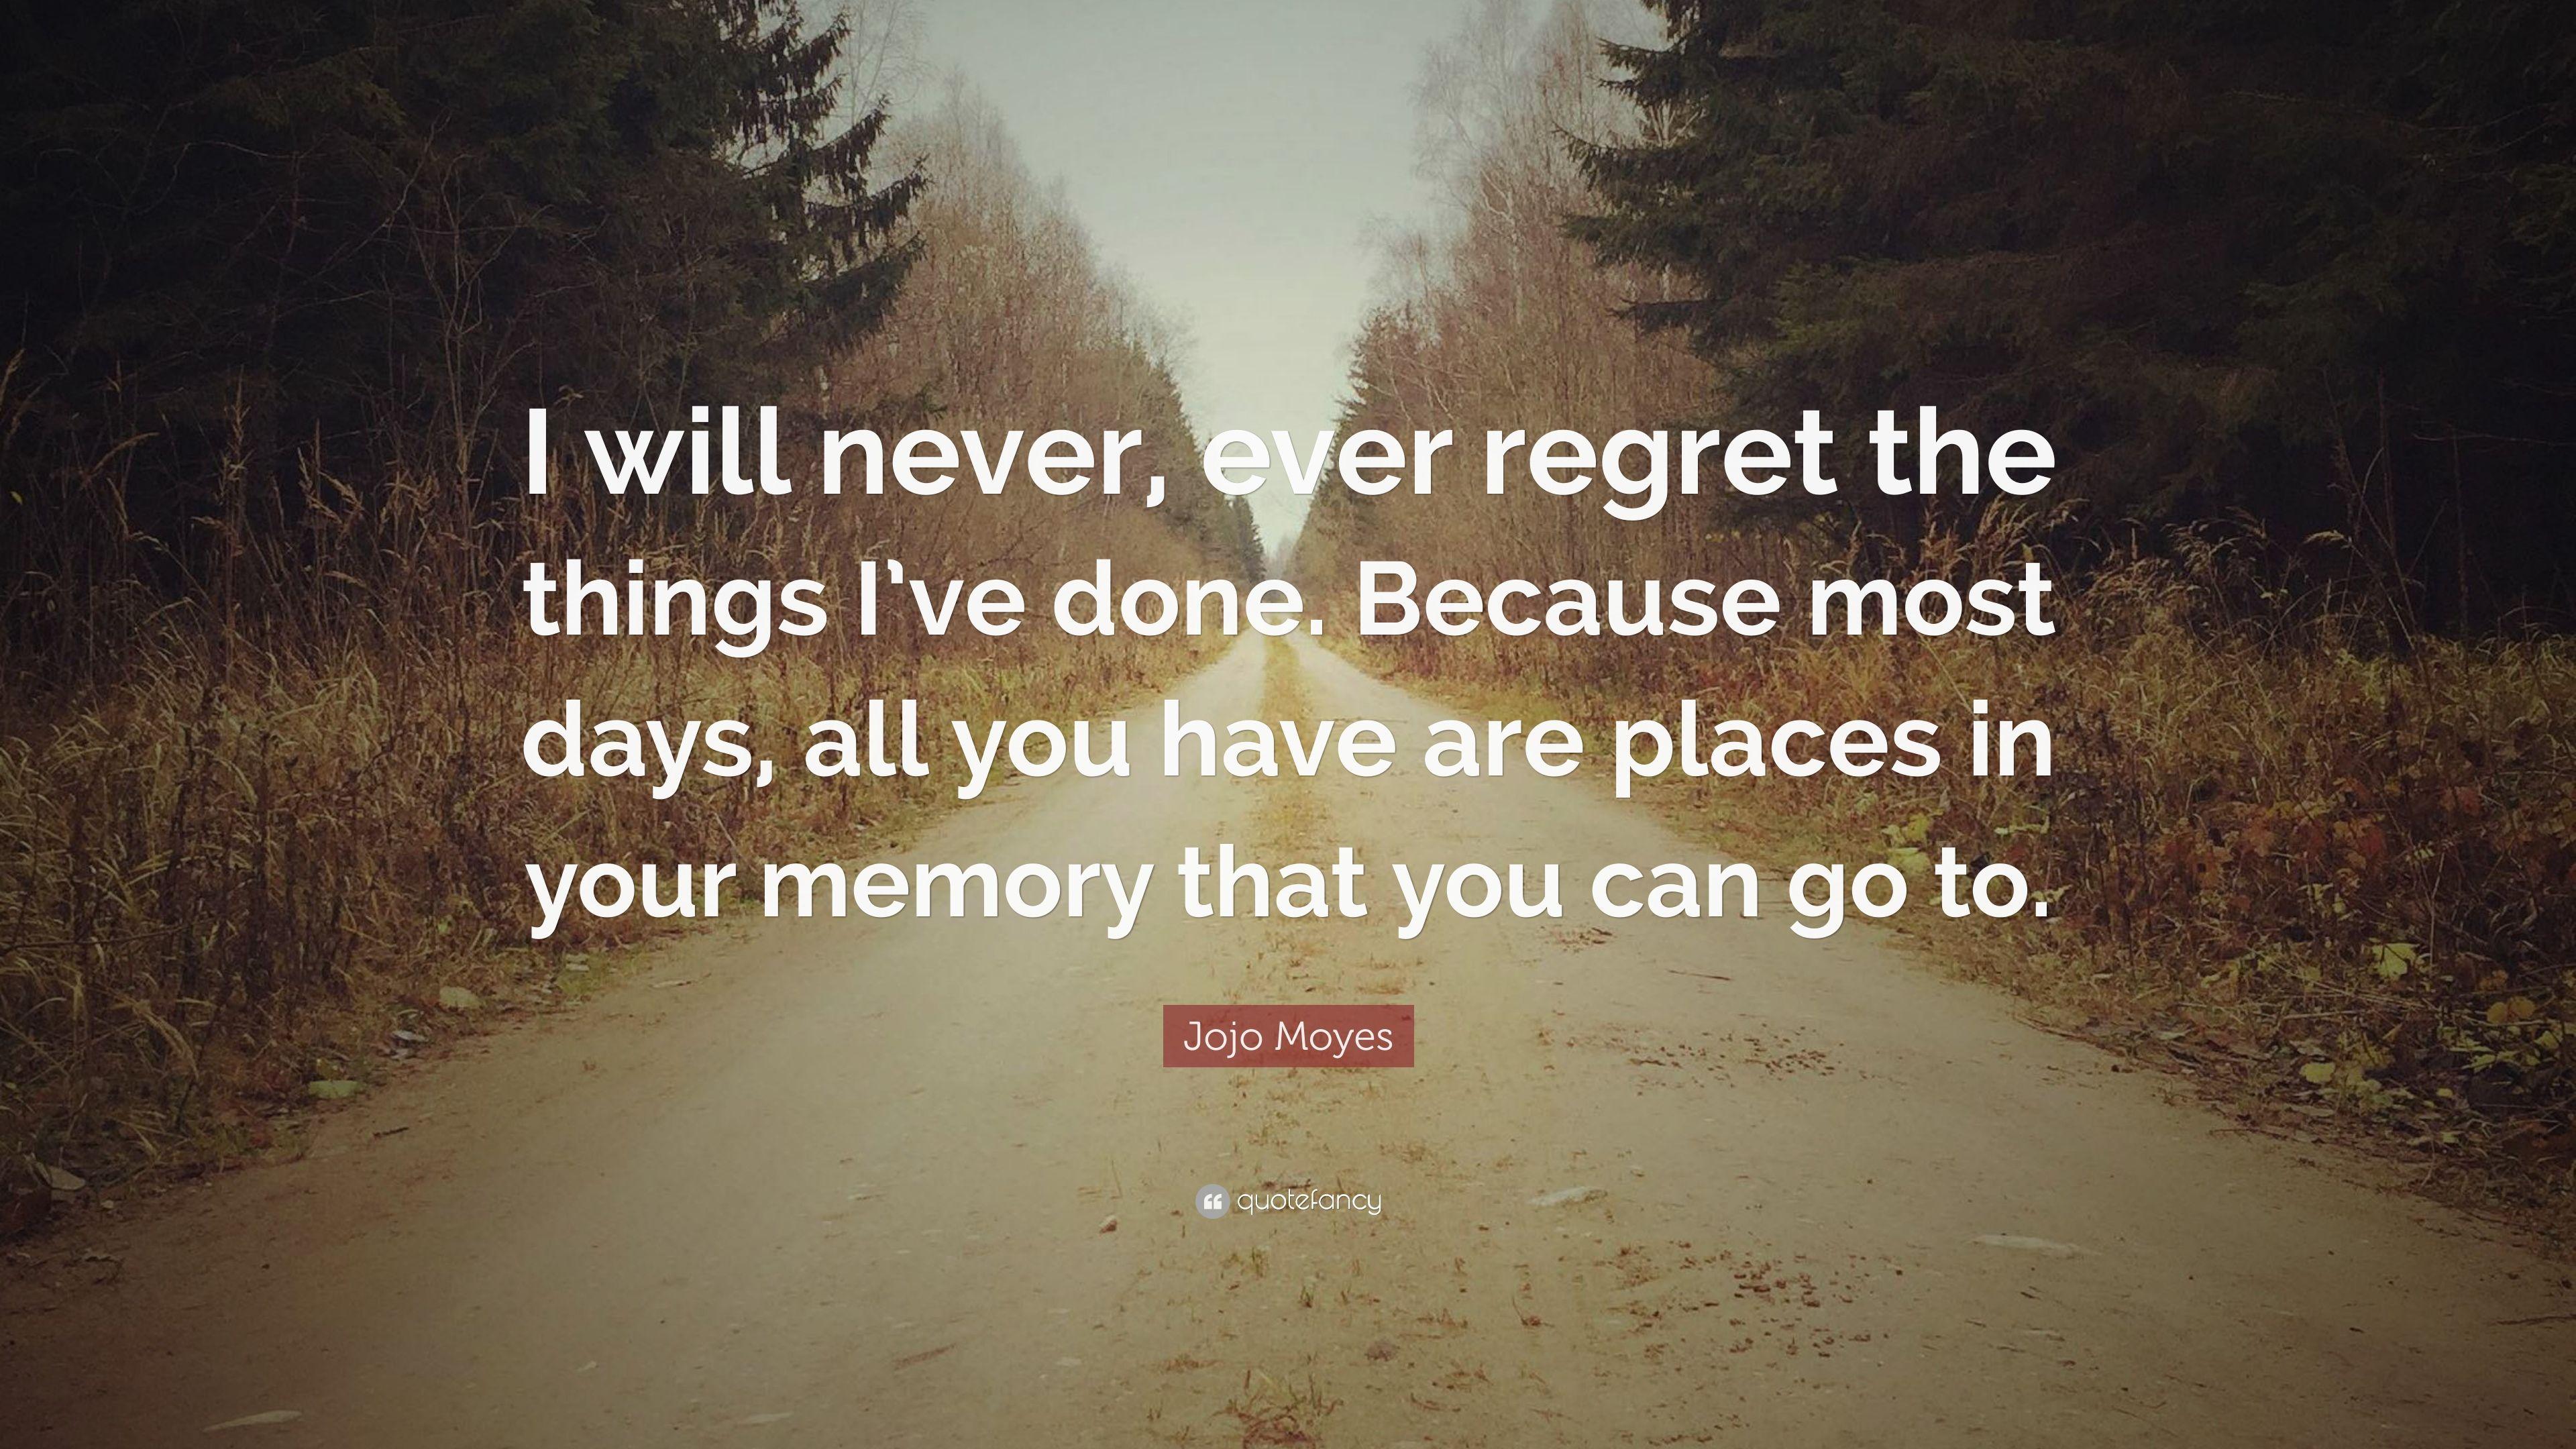 Jojo Moyes Quote: “I will never, ever regret the things I've done